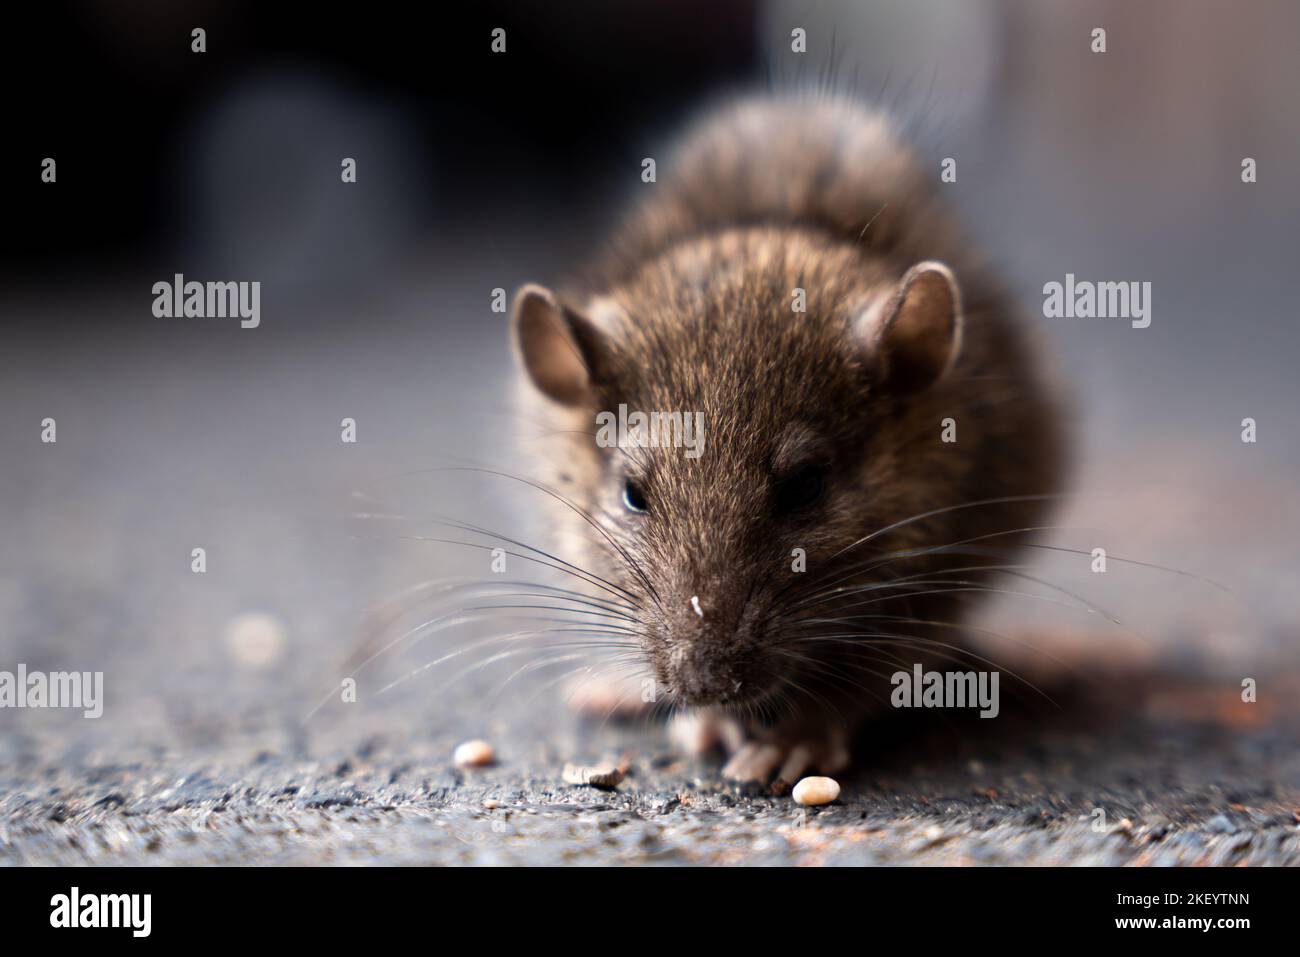 wide angle shot of rat eating something on the str Stock Photo